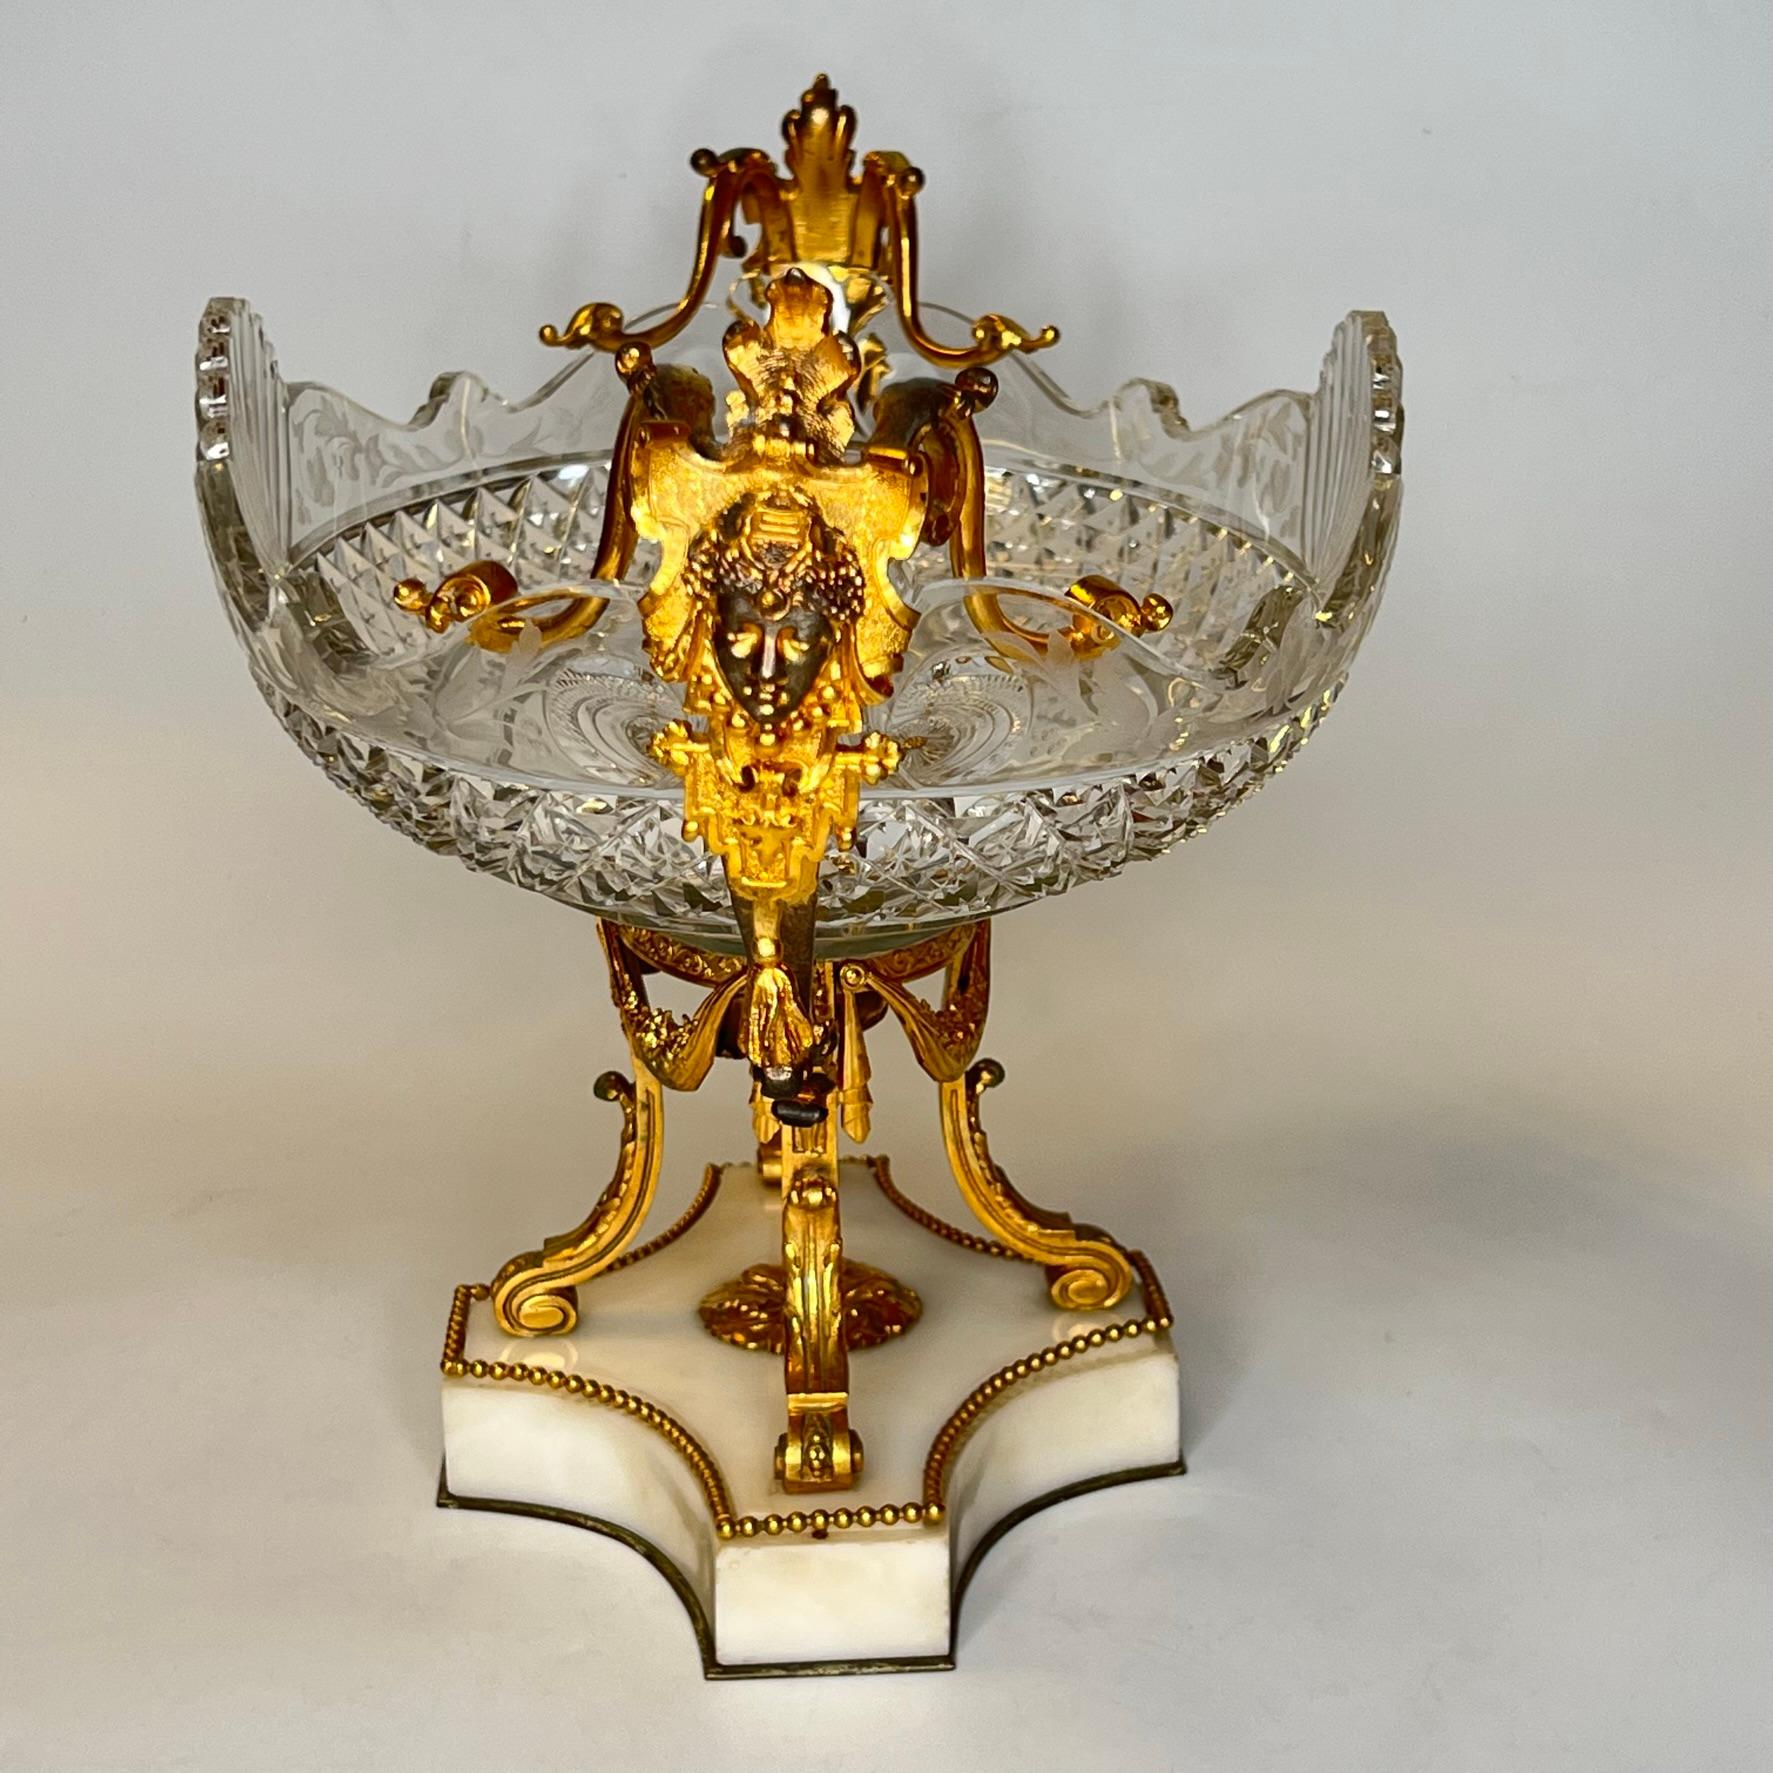 19th Century Baccarat Attributed Gilt Bronze and Cut Glass Centerpiece Bowl For Sale